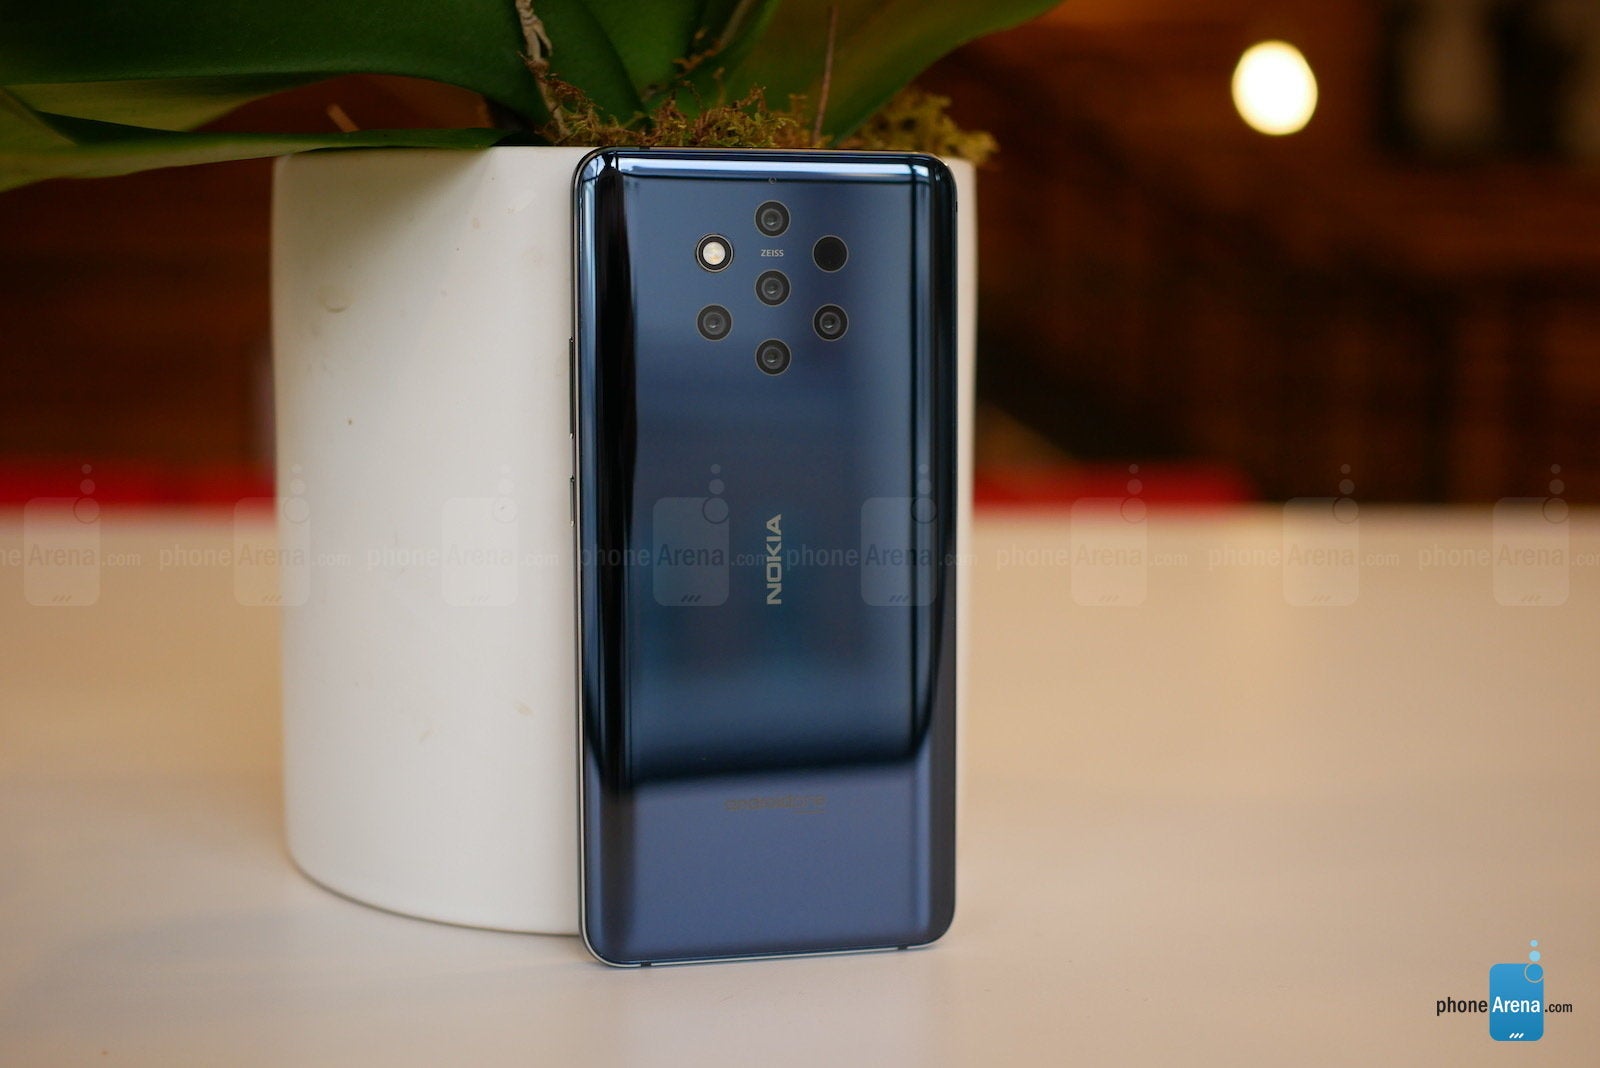 Nokia 9 PureView: the world's first quintuple camera smartphone is here!